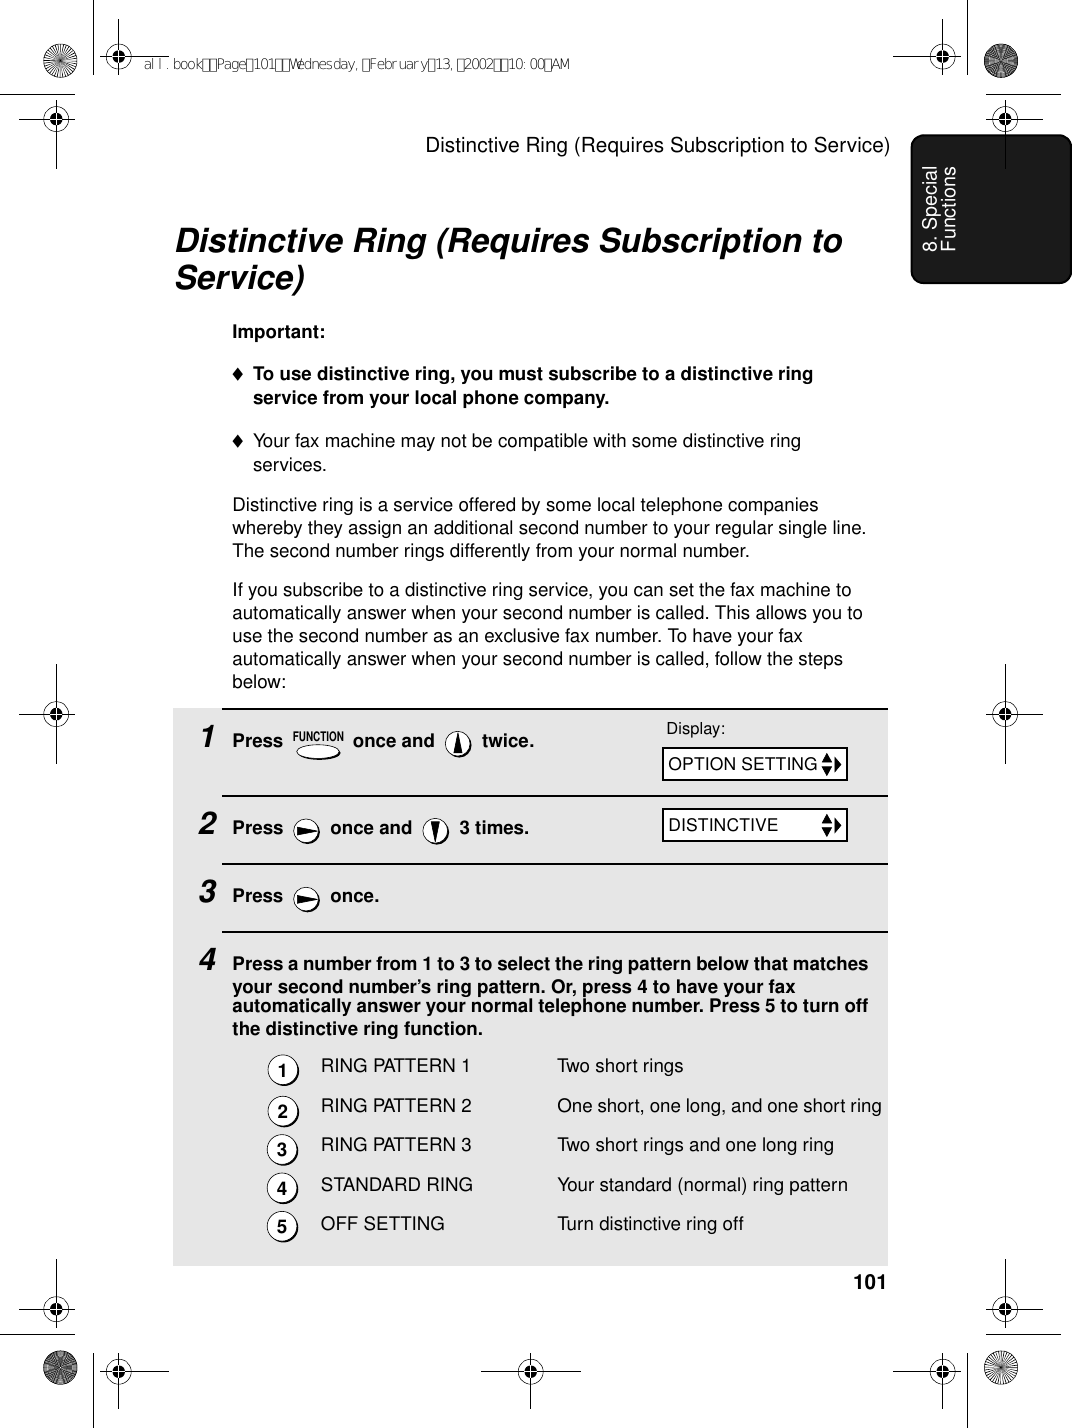 Distinctive Ring (Requires Subscription to Service)1018. Special FunctionsDistinctive Ring (Requires Subscription to Service)Important:♦To use distinctive ring, you must subscribe to a distinctive ring service from your local phone company.♦Your fax machine may not be compatible with some distinctive ring services.Distinctive ring is a service offered by some local telephone companies whereby they assign an additional second number to your regular single line. The second number rings differently from your normal number.If you subscribe to a distinctive ring service, you can set the fax machine to automatically answer when your second number is called. This allows you to use the second number as an exclusive fax number. To have your fax automatically answer when your second number is called, follow the steps below:1Press   once and   twice.2Press   once and   3 times.3Press  once.4Press a number from 1 to 3 to select the ring pattern below that matches your second number’s ring pattern. Or, press 4 to have your fax automatically answer your normal telephone number. Press 5 to turn off the distinctive ring function.RING PATTERN 1 Two short ringsRING PATTERN 2 One short, one long, and one short ringRING PATTERN 3 Two short rings and one long ringSTANDARD RING Your standard (normal) ring patternOFF SETTING Turn distinctive ring offFUNCTIONDisplay:12345OPTION SETTINGDISTINCTIVEall.bookPage101Wednesday,February13,200210:00AM